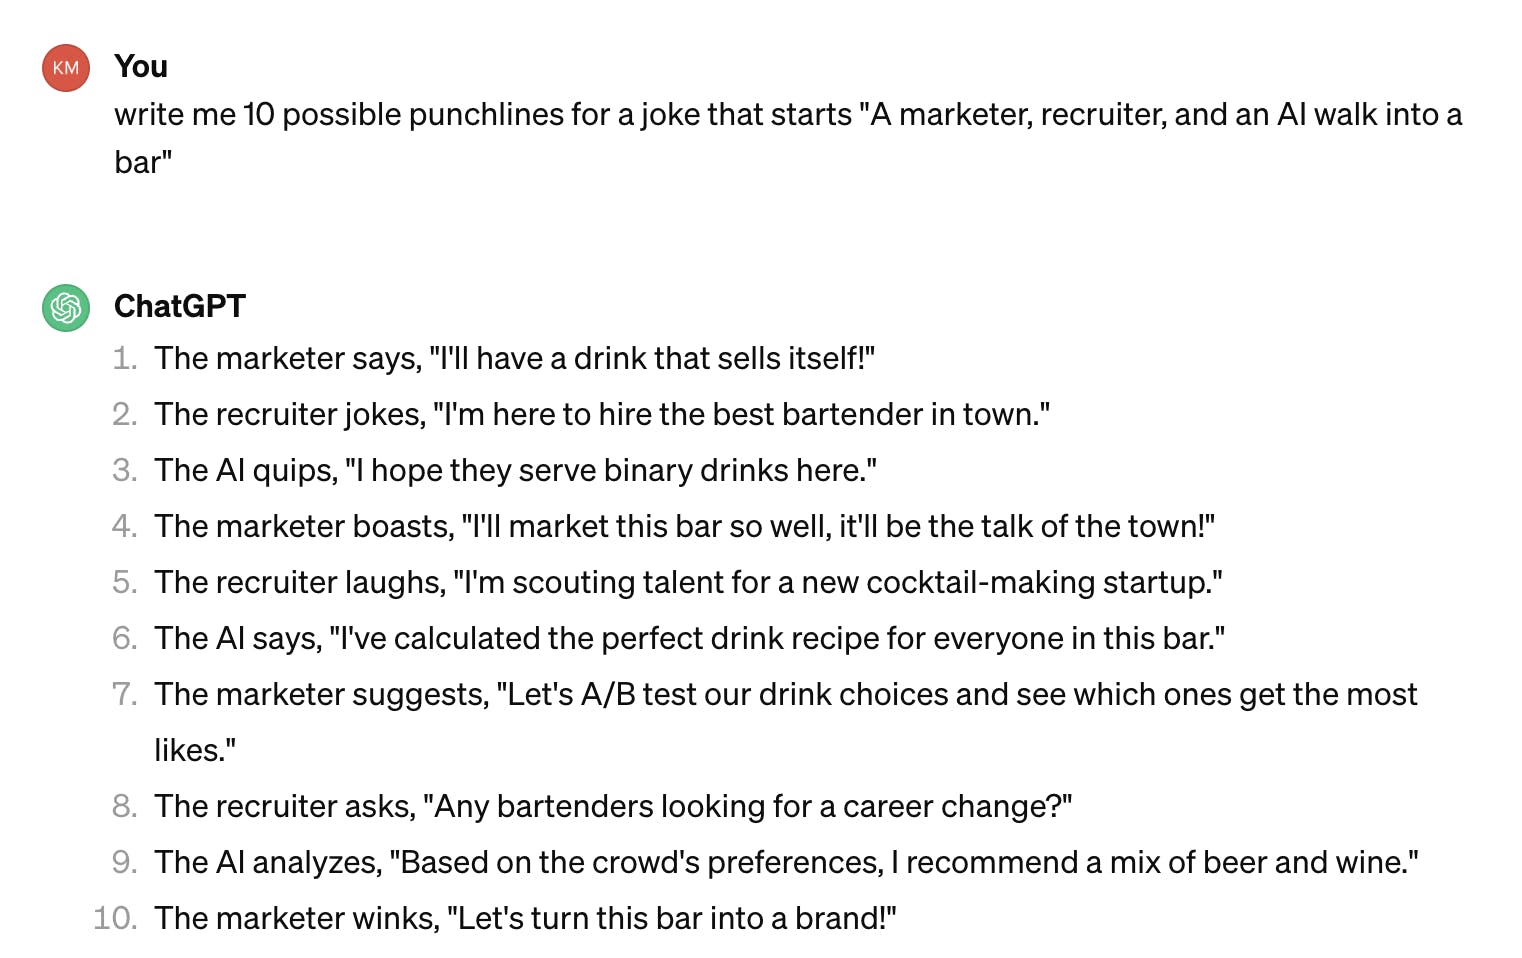 ChatGPT responses to the query above The marketer says, "I'll have a drink that sells itself!" The recruiter jokes, "I'm here to hire the best bartender in town." The AI quips, "I hope they serve binary drinks here." The marketer boasts, "I'll market this bar so well, it'll be the talk of the town!" The recruiter laughs, "I'm scouting talent for a new cocktail-making startup." The AI says, "I've calculated the perfect drink recipe for everyone in this bar." The marketer suggests, "Let's A/B test our drink choices and see which ones get the most likes." The recruiter asks, "Any bartenders looking for a career change?" The AI analyzes, "Based on the crowd's preferences, I recommend a mix of beer and wine." The marketer winks, "Let's turn this bar into a brand!"